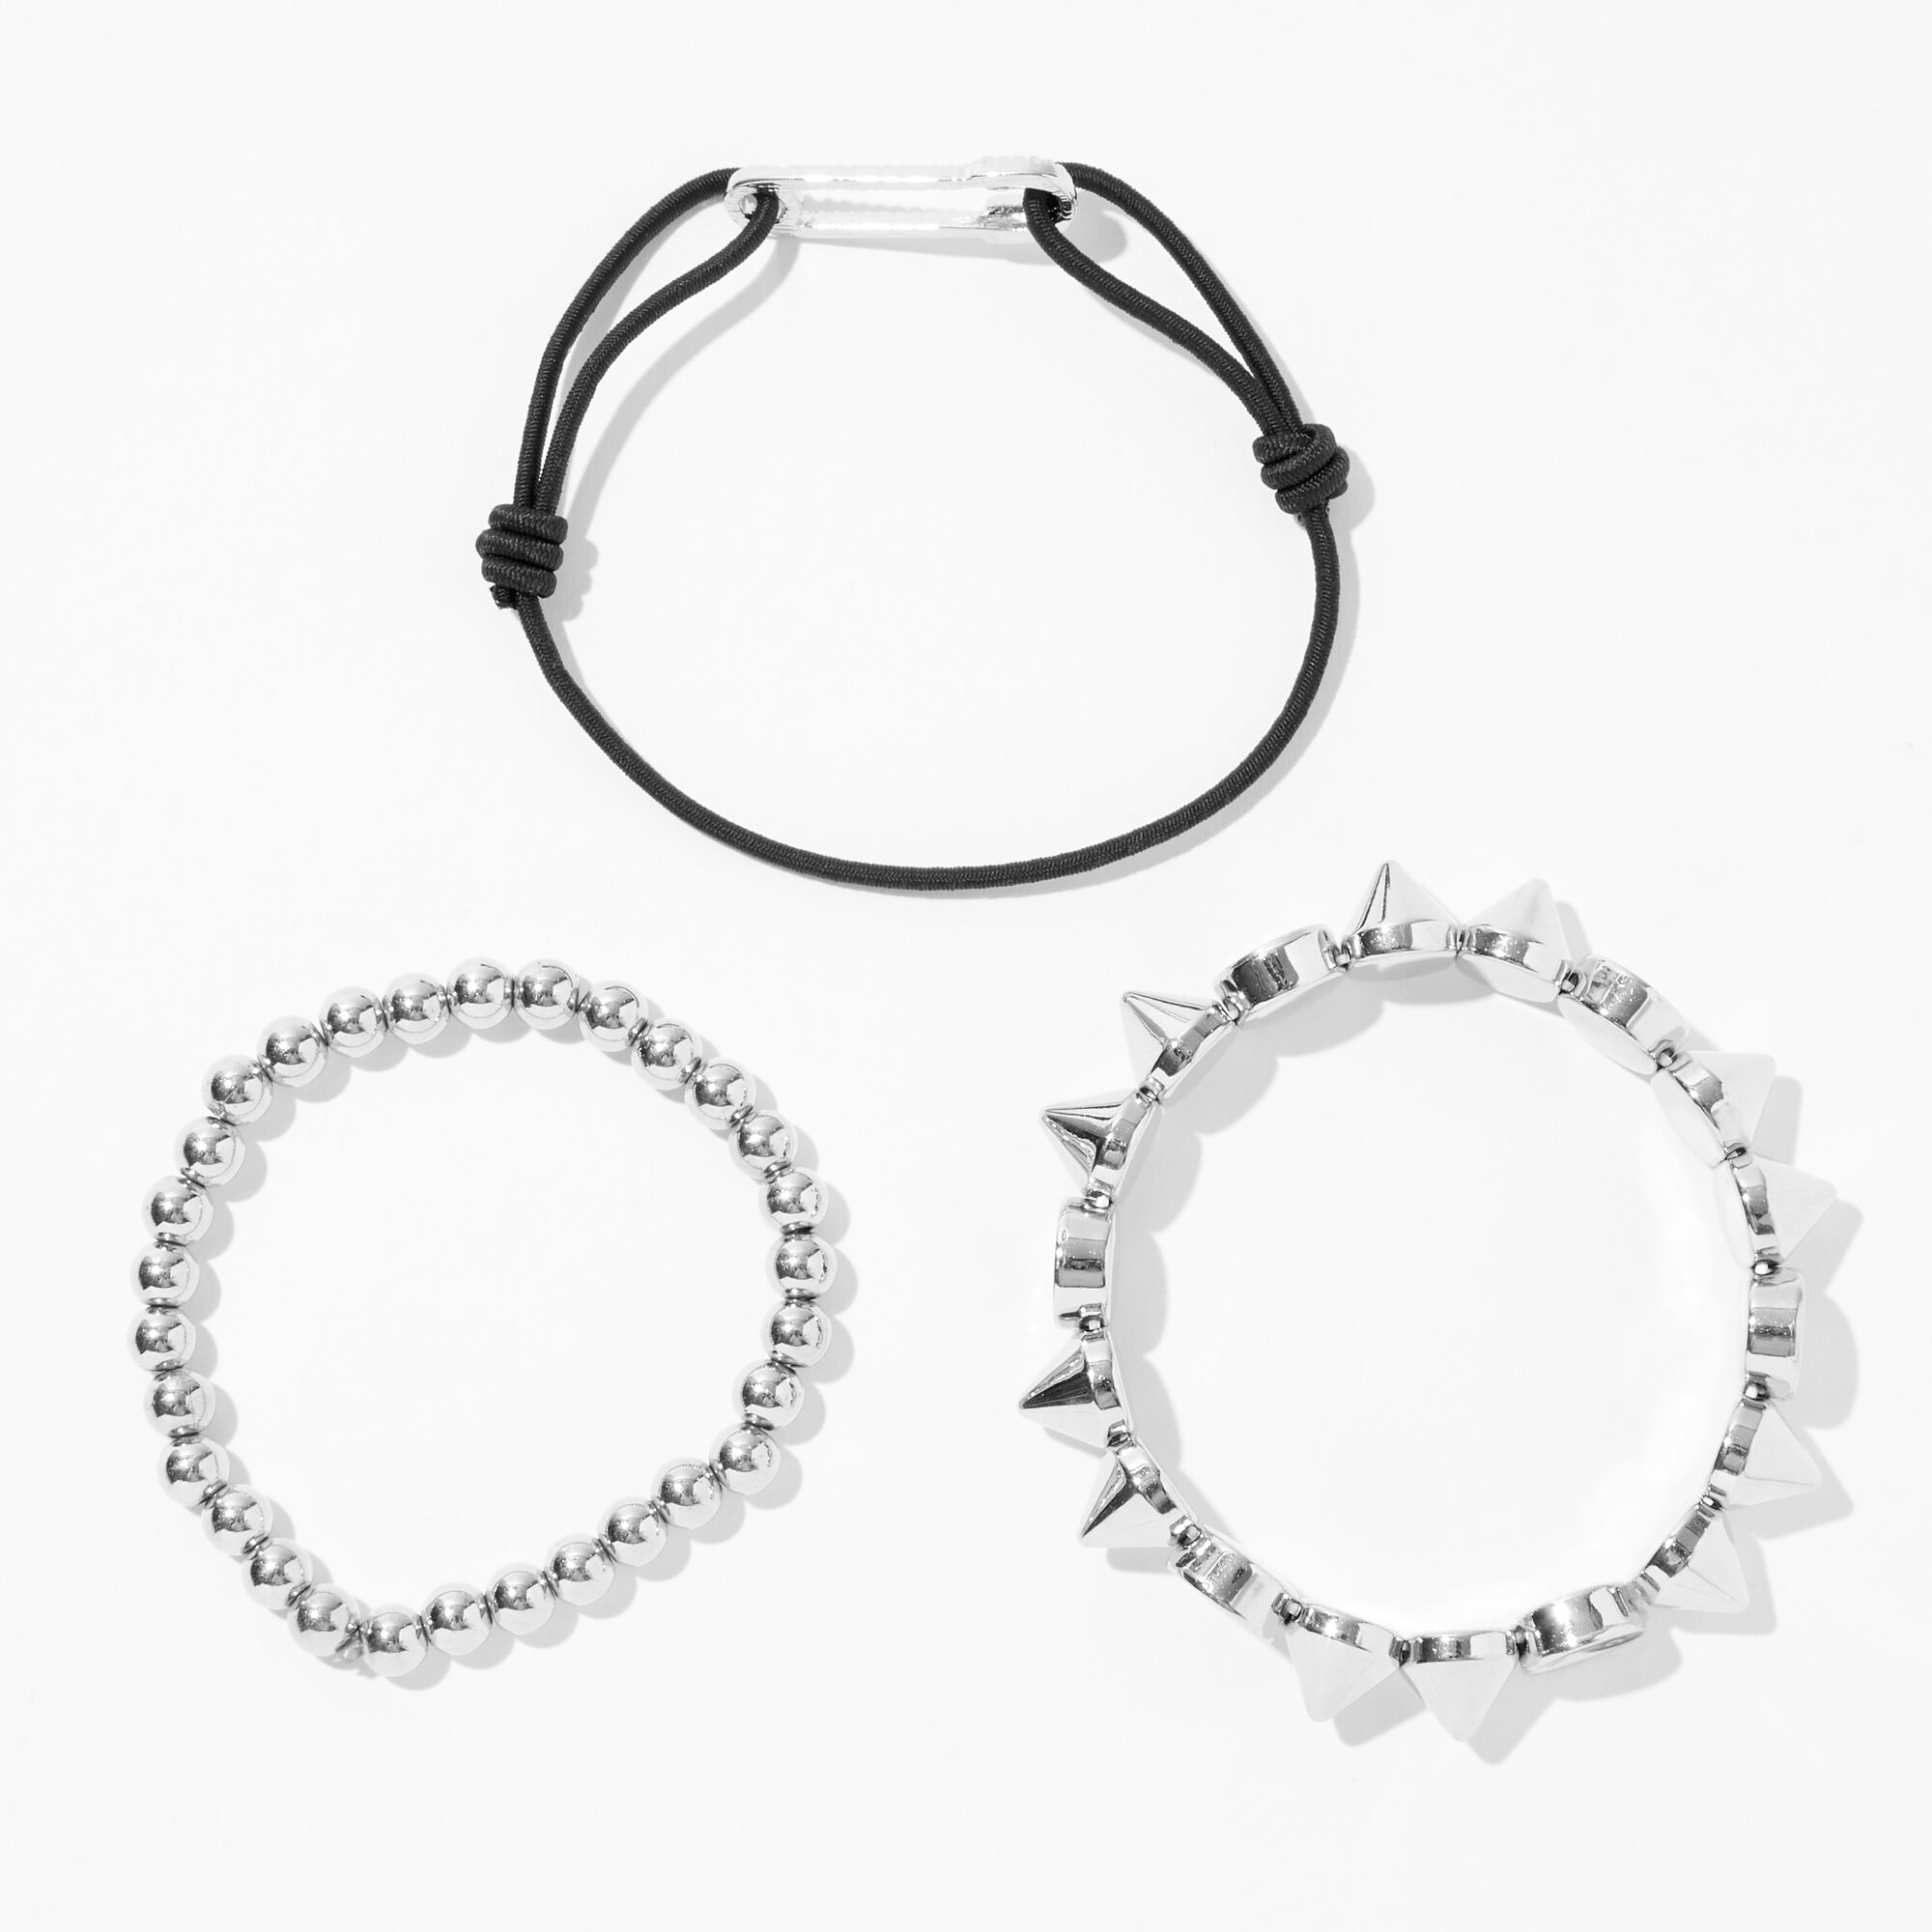 View Claires Tone Spike Yin Yang Beaded Stretch Bracelets 3 Pack Silver information